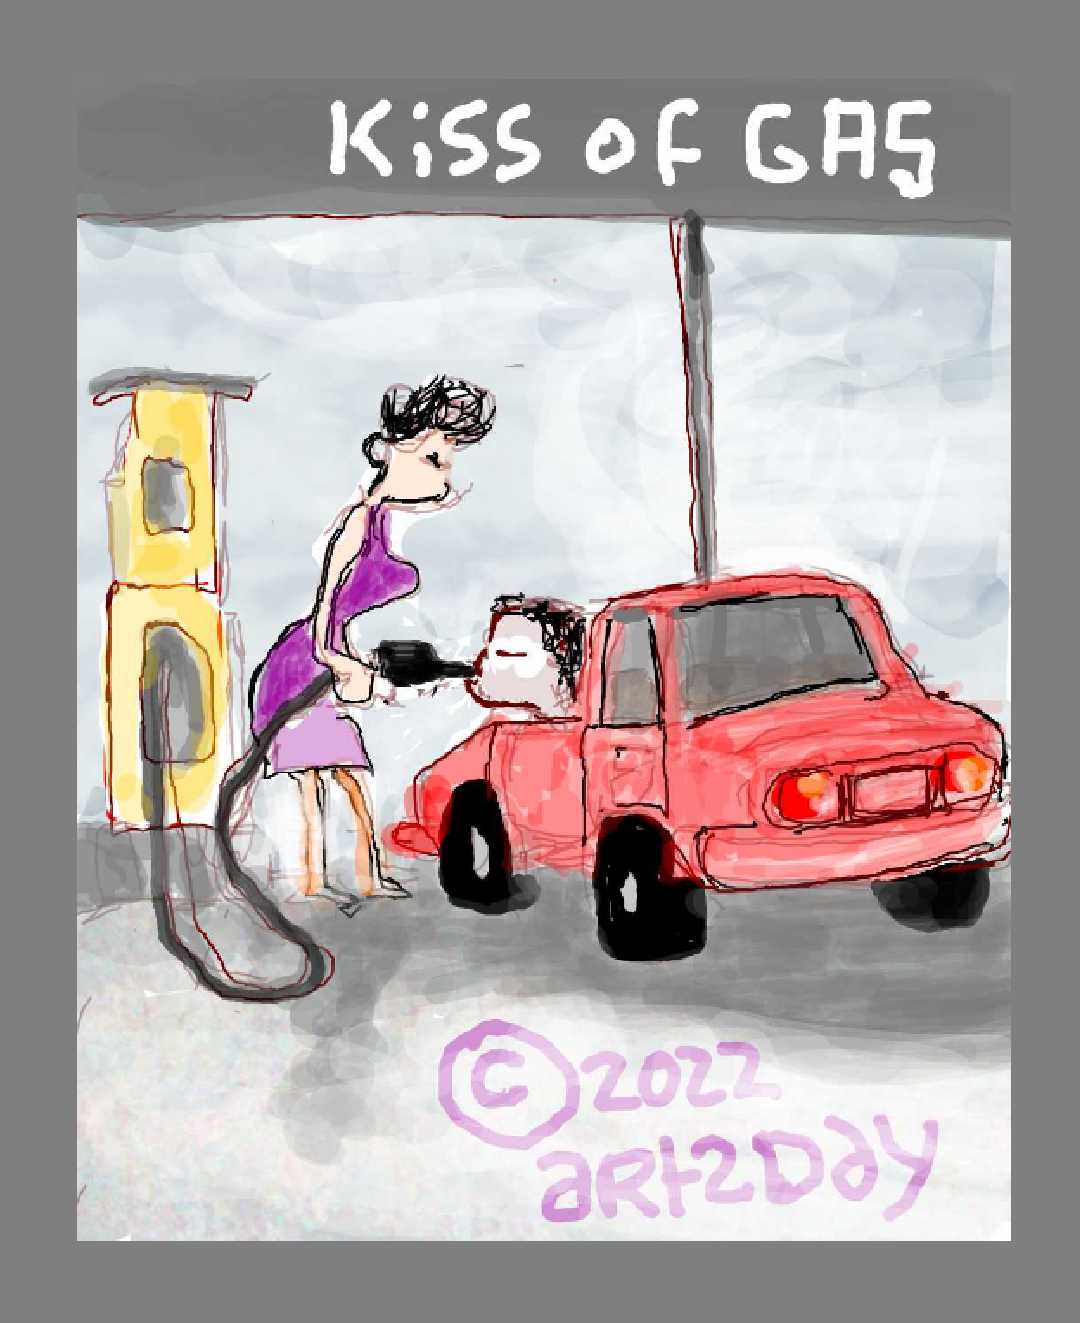 kiss of gas